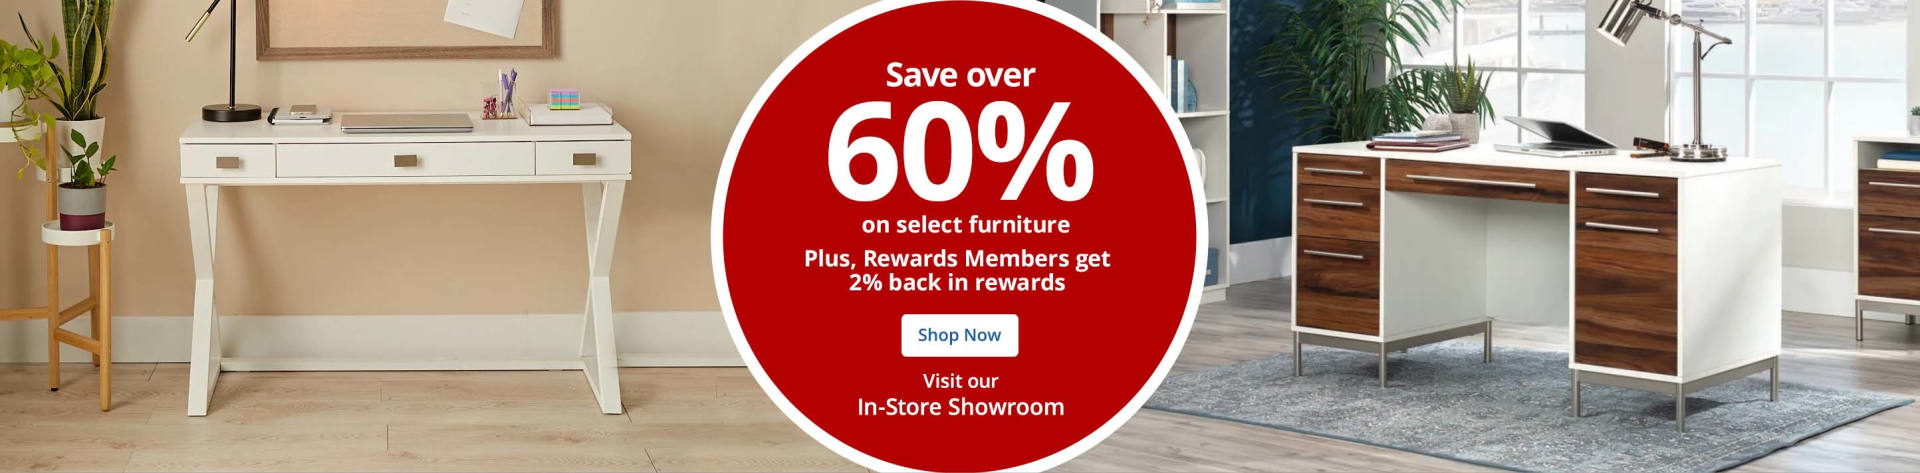 Save over 60% on select furniture